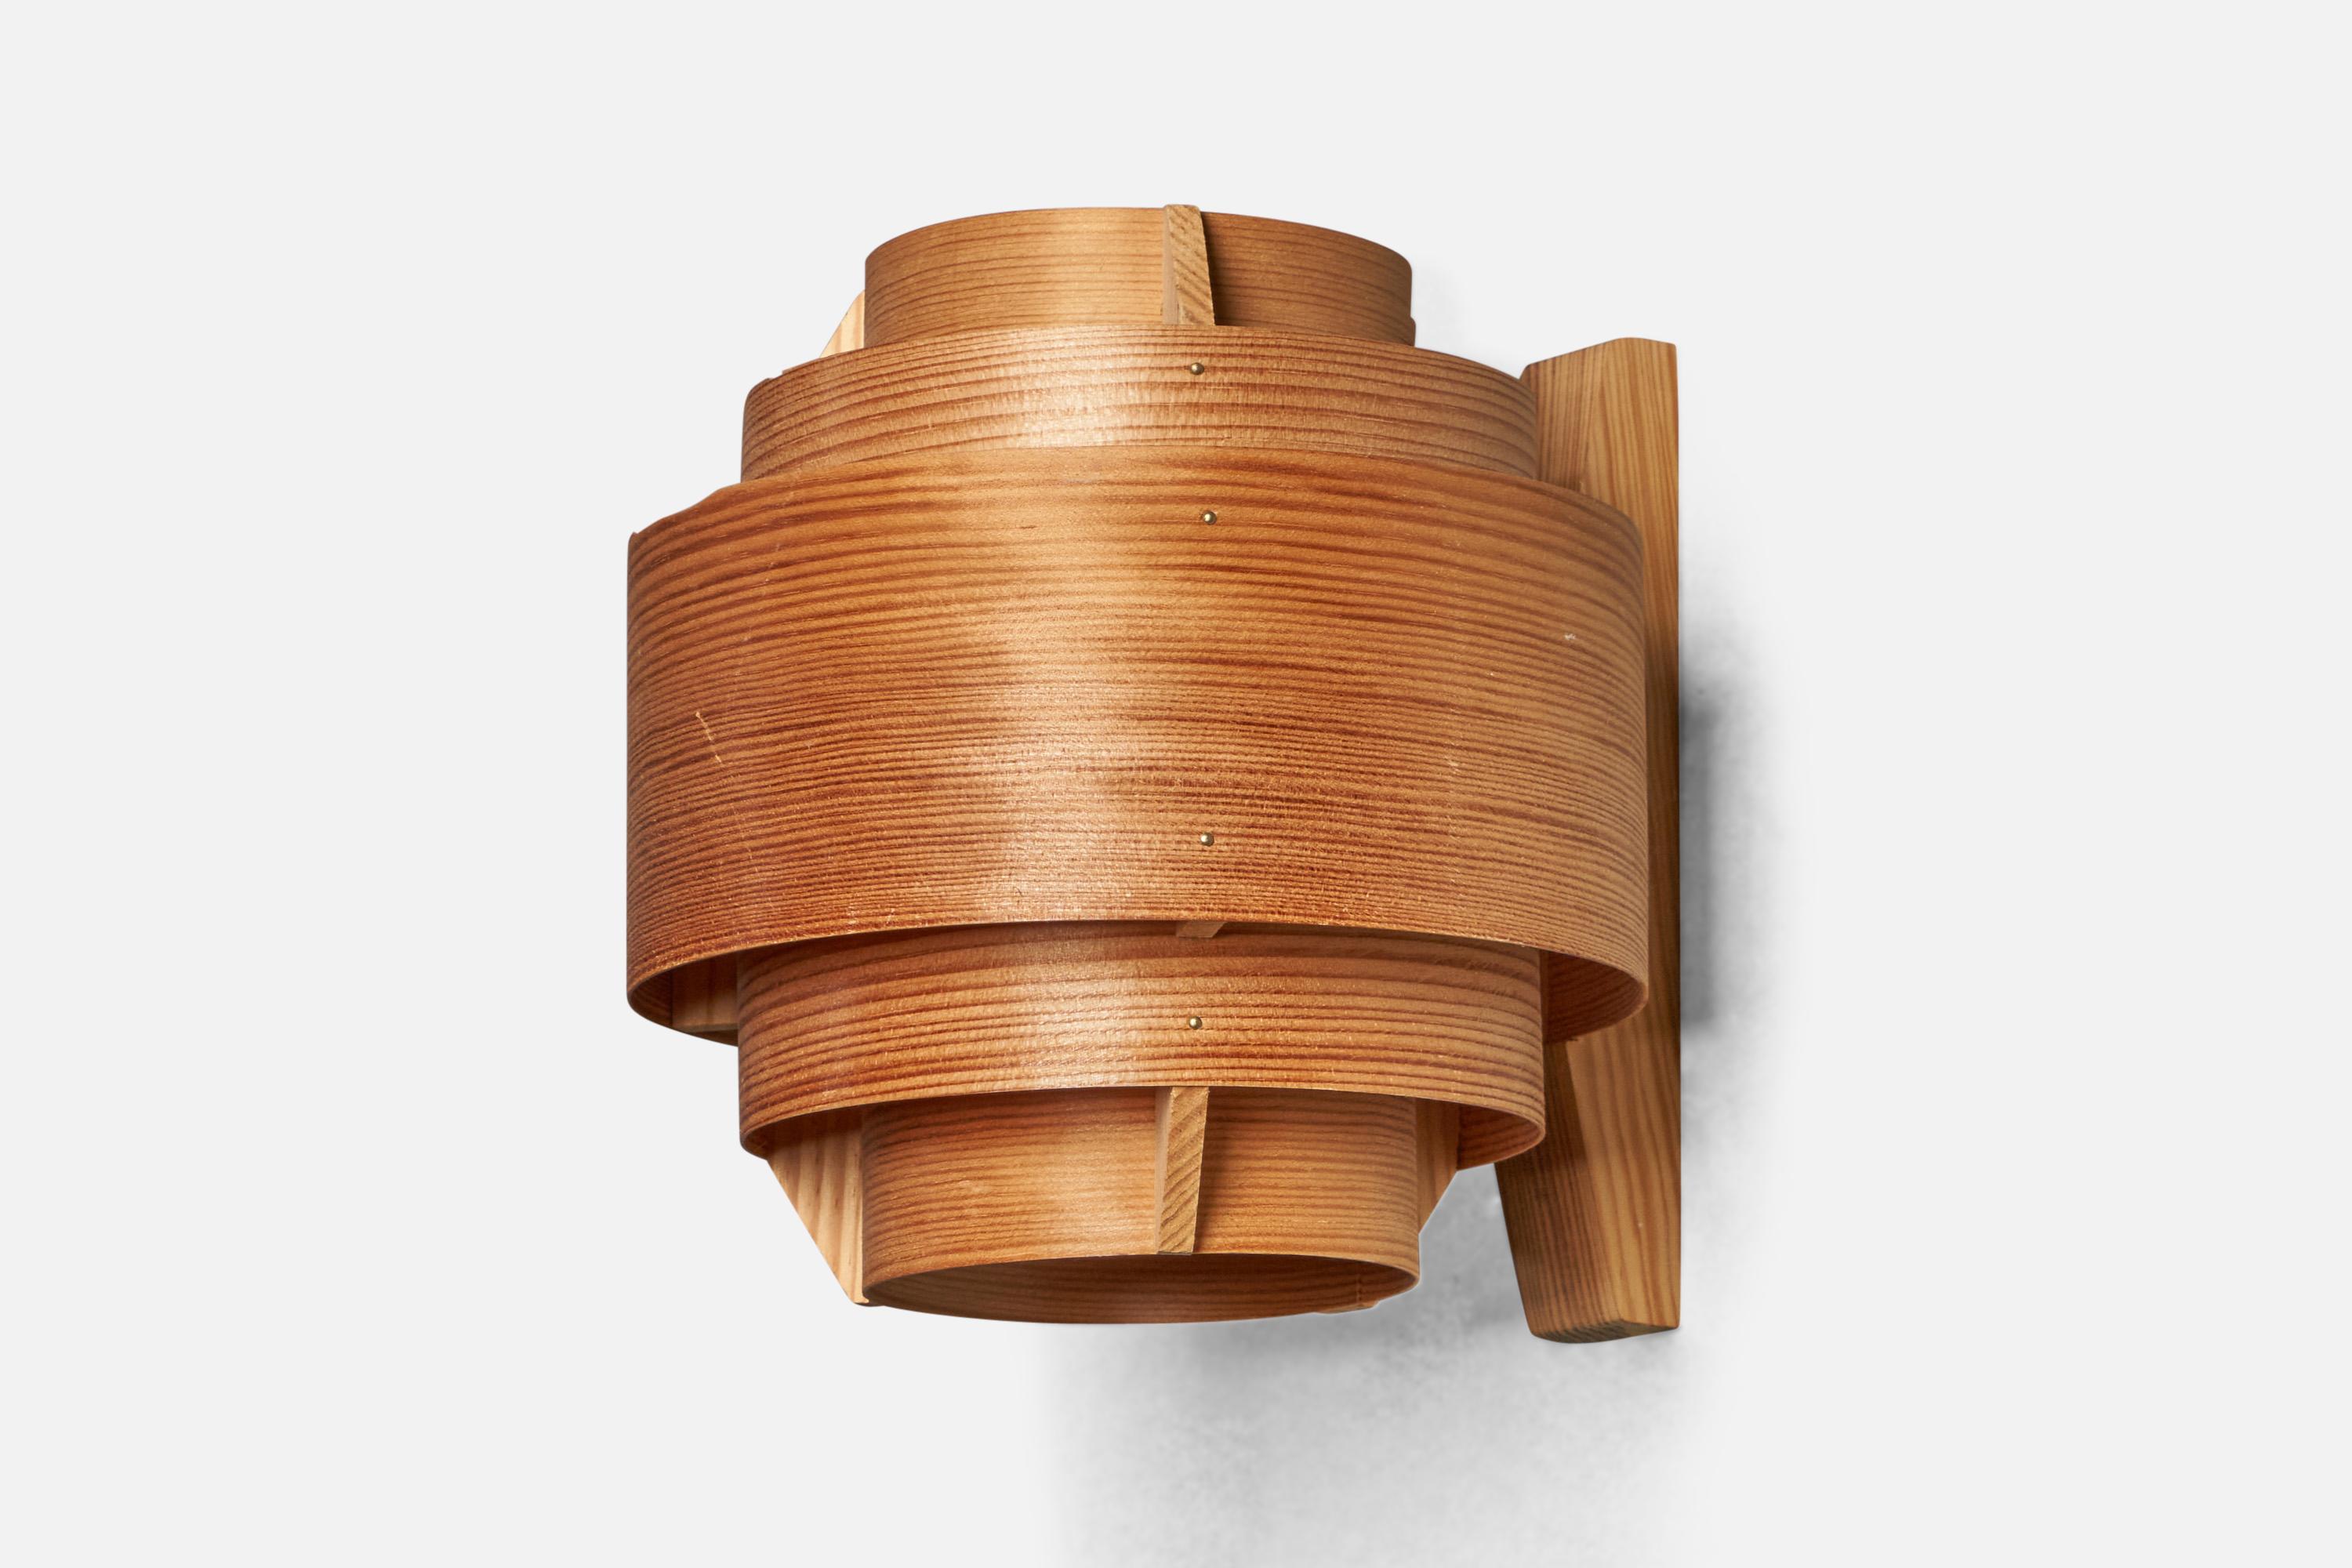 A pine and moulded pine veneer wall light designed by Hans Agne Jakobssen and produced by Elysett, Sweden, 1970s.

Overall Dimensions (inches): 7” H x 7” Diameter 
Back Plate Dimensions (inches): 7” H x 1” W x 1” D
Bulb Specifications: E-26